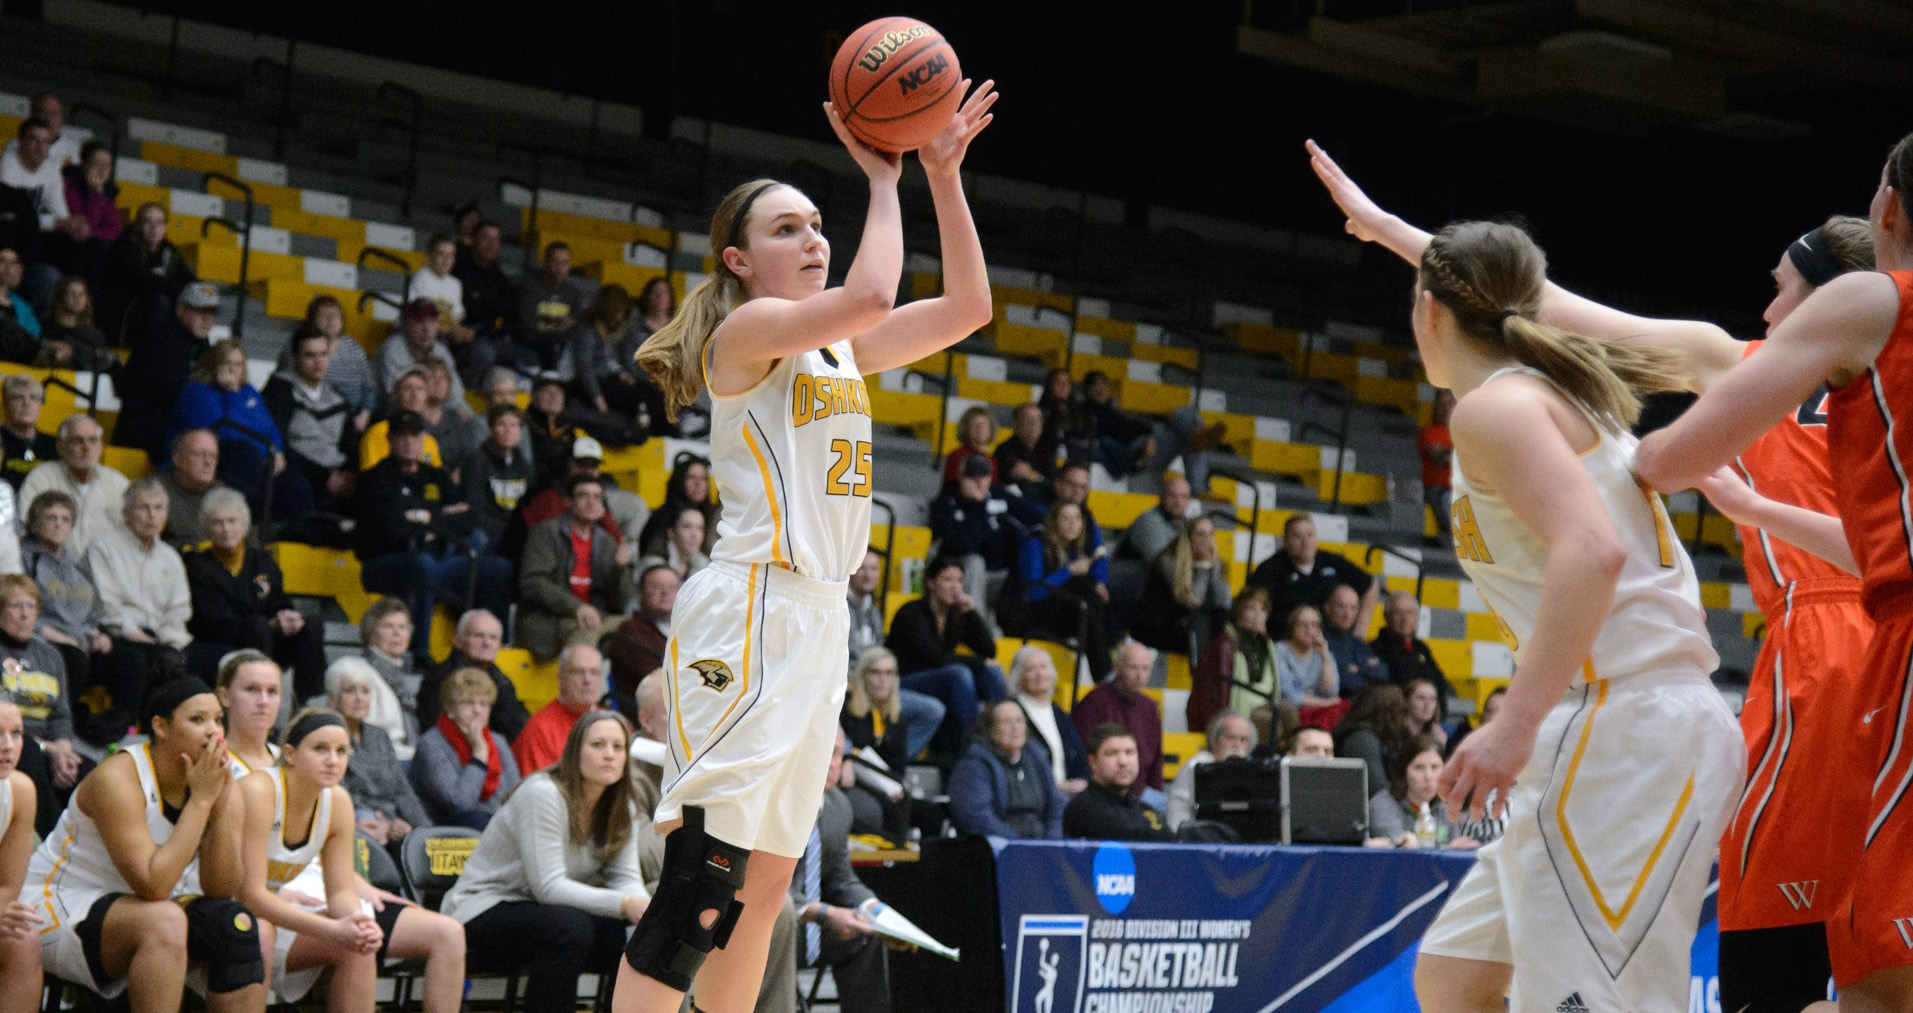 Marissa Selner scored five points and grabbed five rebounds in Saturday's game, her 100th as a Titan.